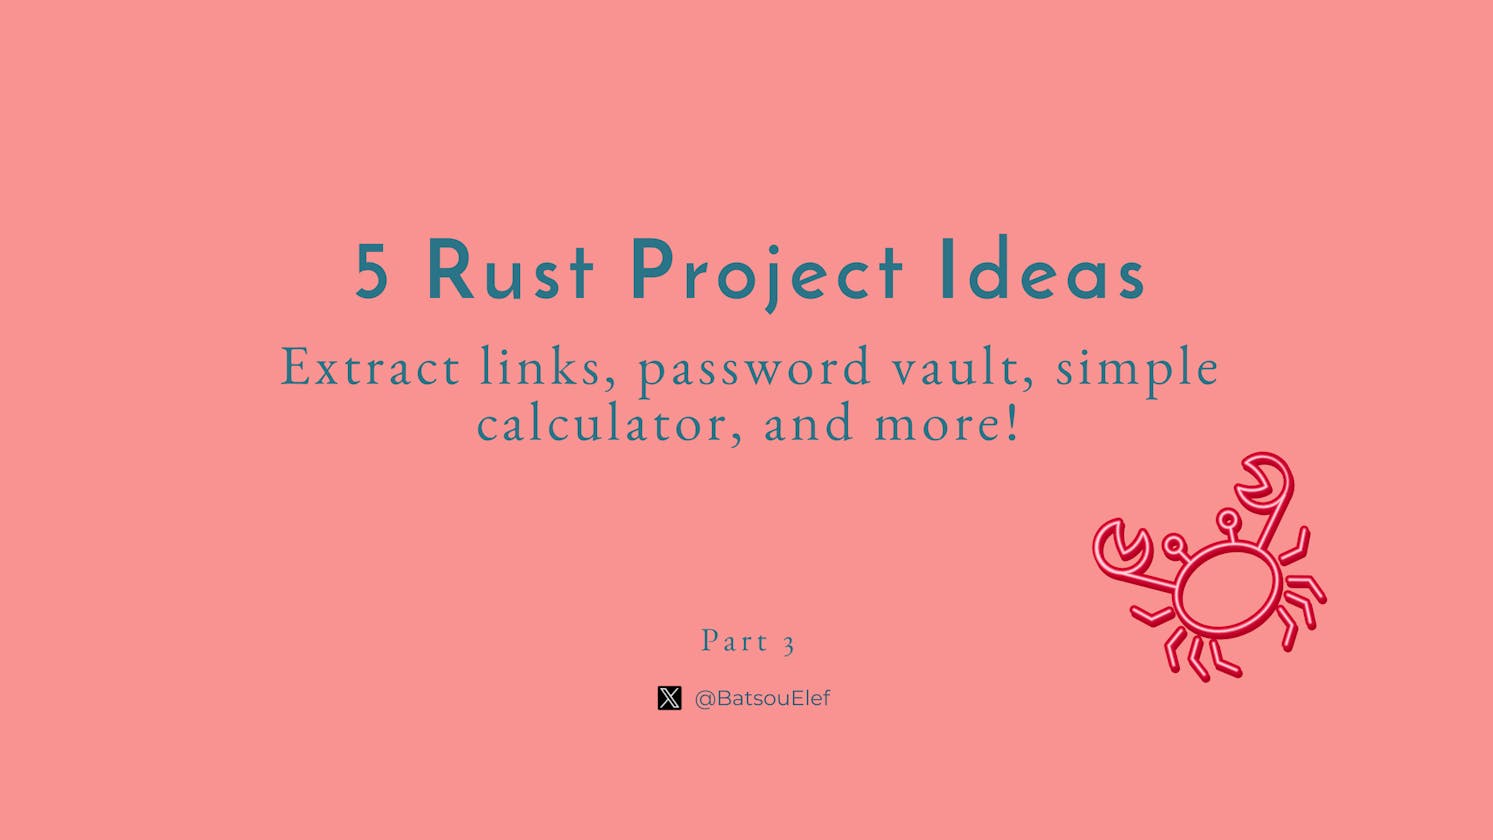 5 Rust Project Ideas For Beginner to Mid Devs 🦀